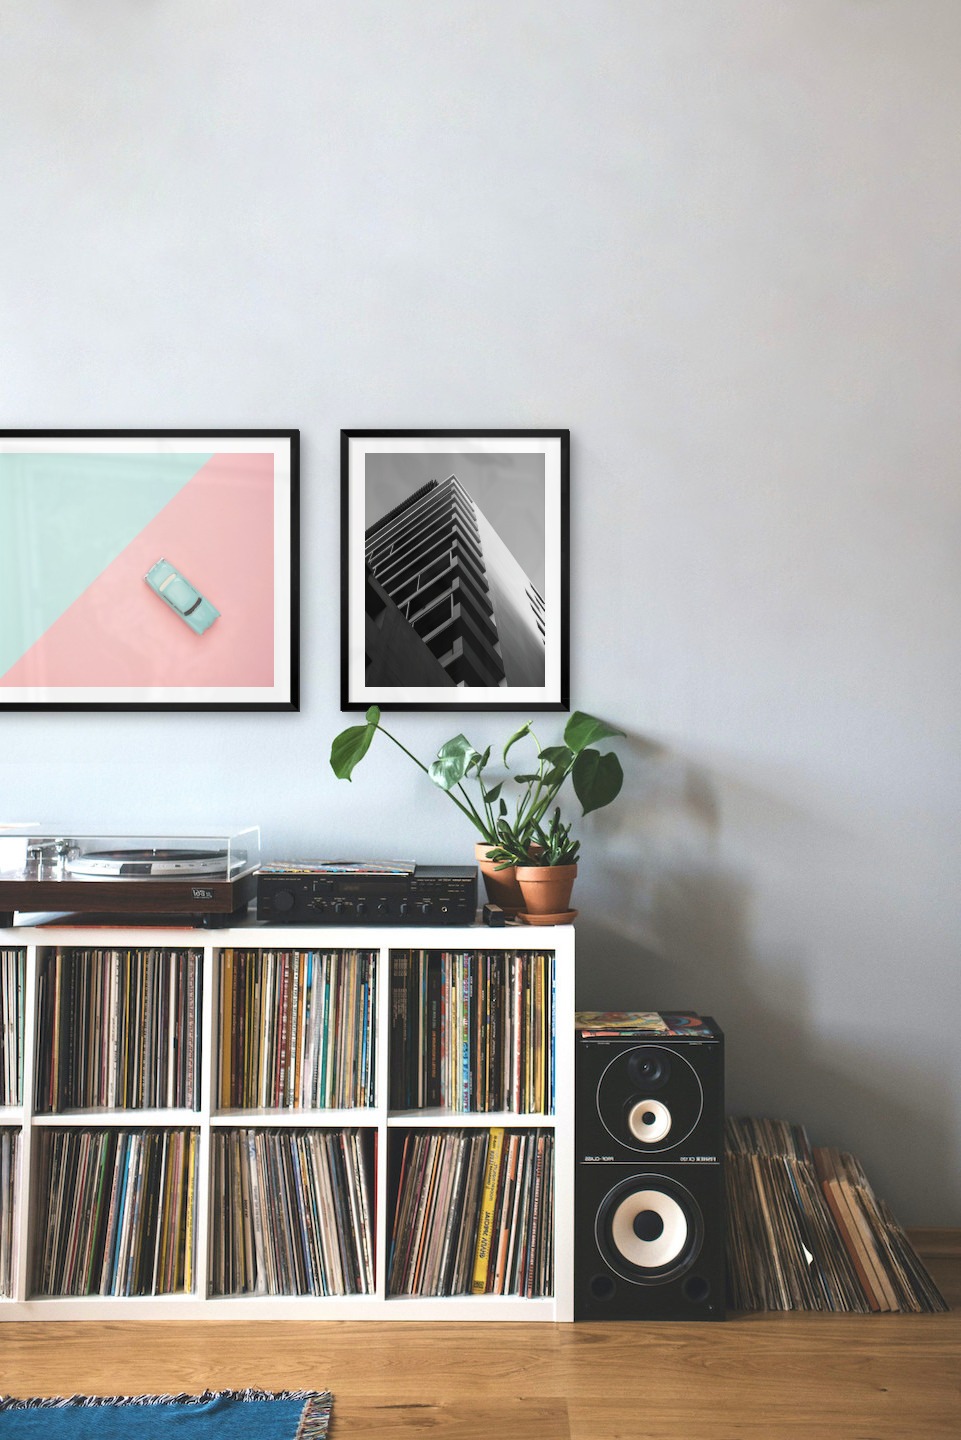 Gallery wall with picture frames in black in sizes 50x70 and 40x50 with prints "Blue car and pink" and "Black and white building"